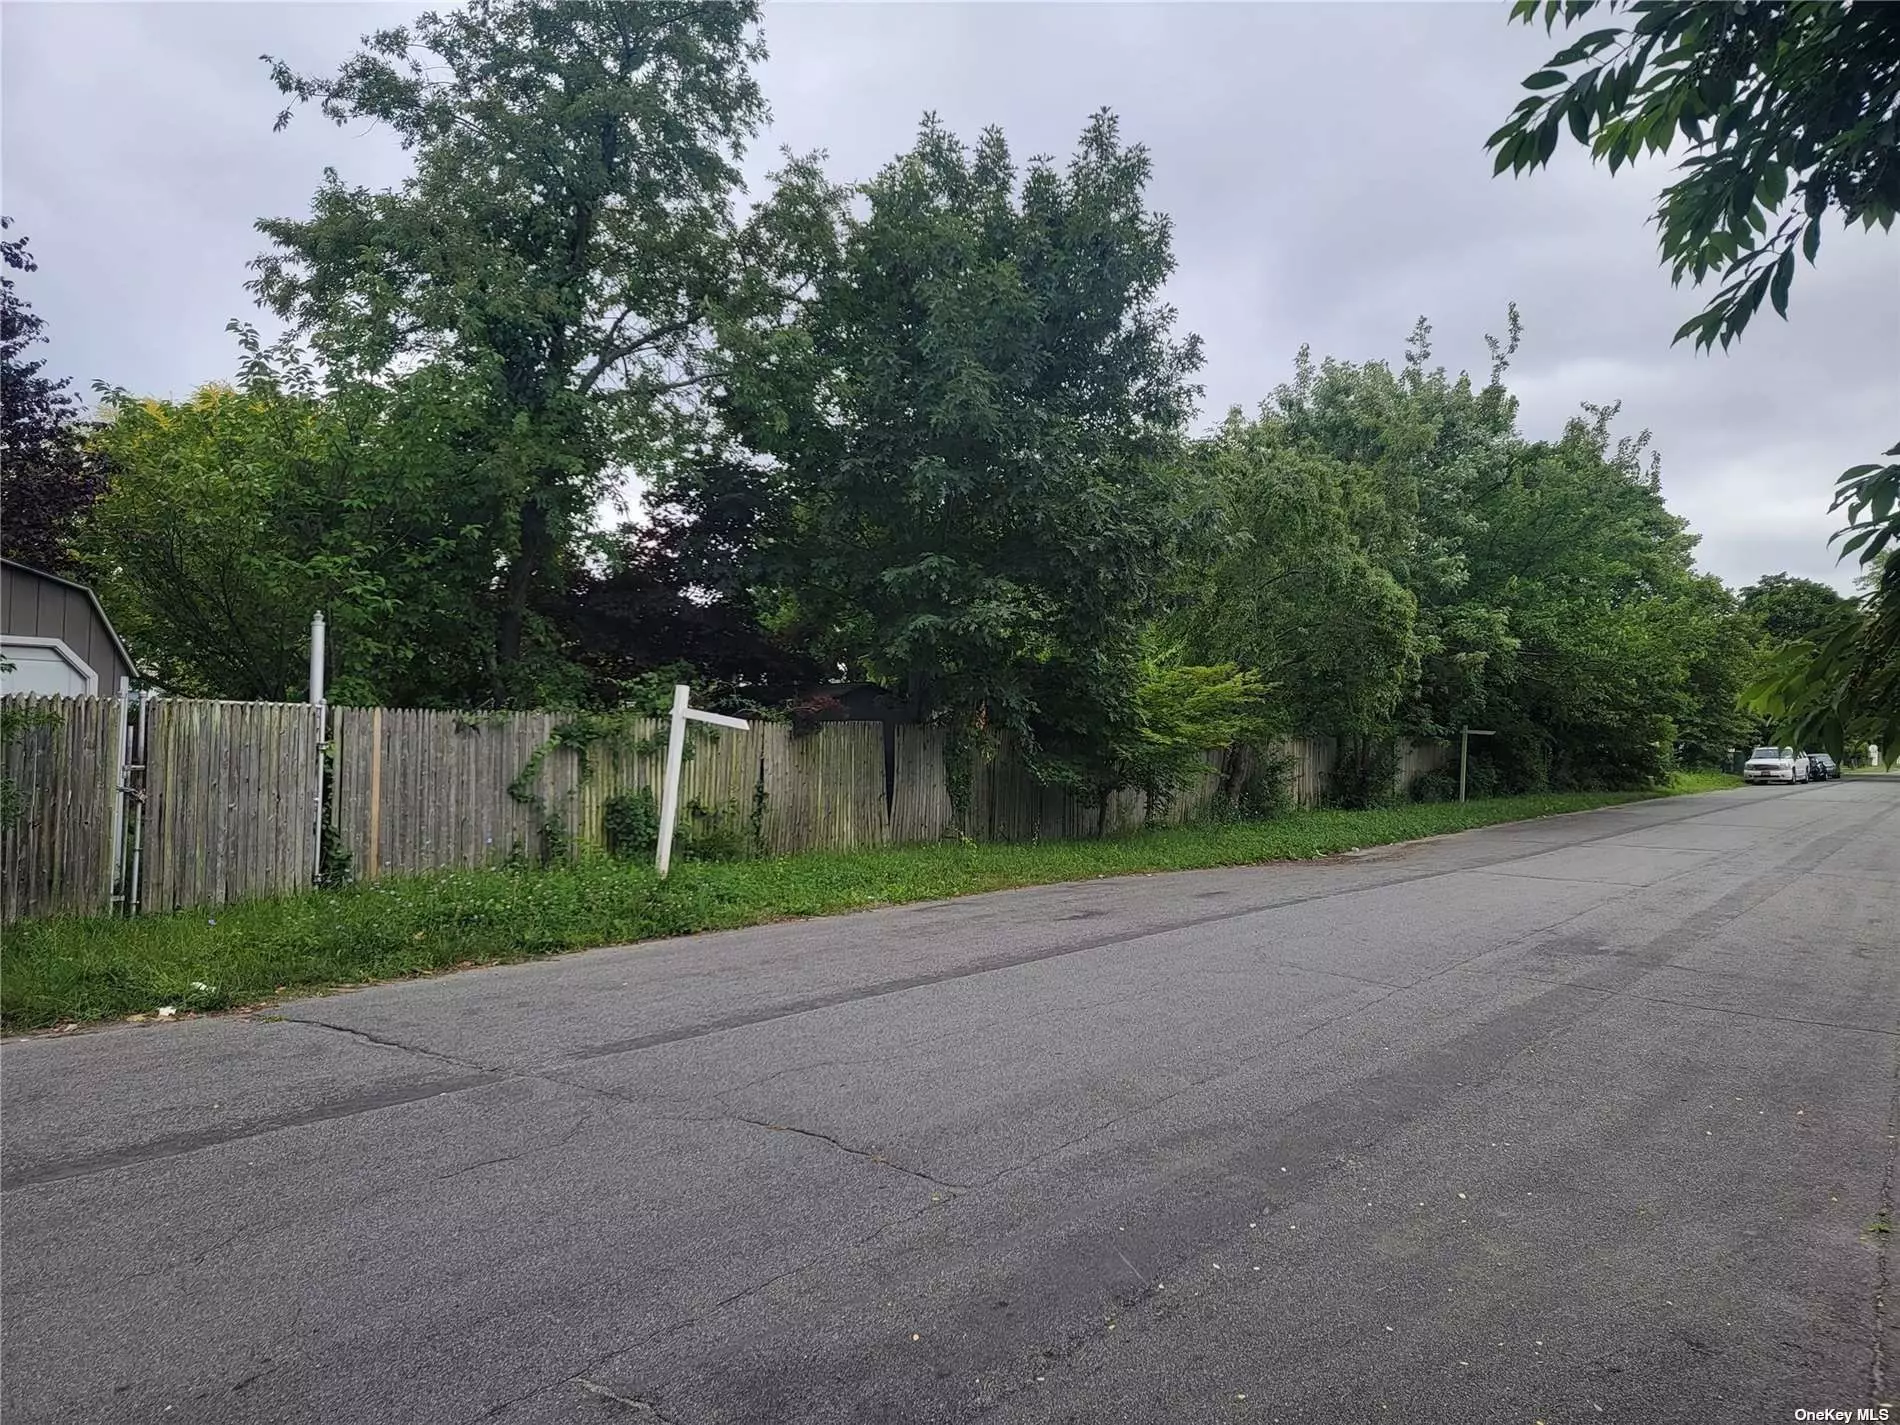 Property consists of 3 Separate deeded Lots of Land, 59 X 47, 61 X 47 & 60 X 47 Total 47 X 180 Land Has Many Leyland Cypress Shrubs For Privacy. 2 small Sheds and a garage/shed. Total Street frontage is 180&rsquo; and sewer lines are in street.